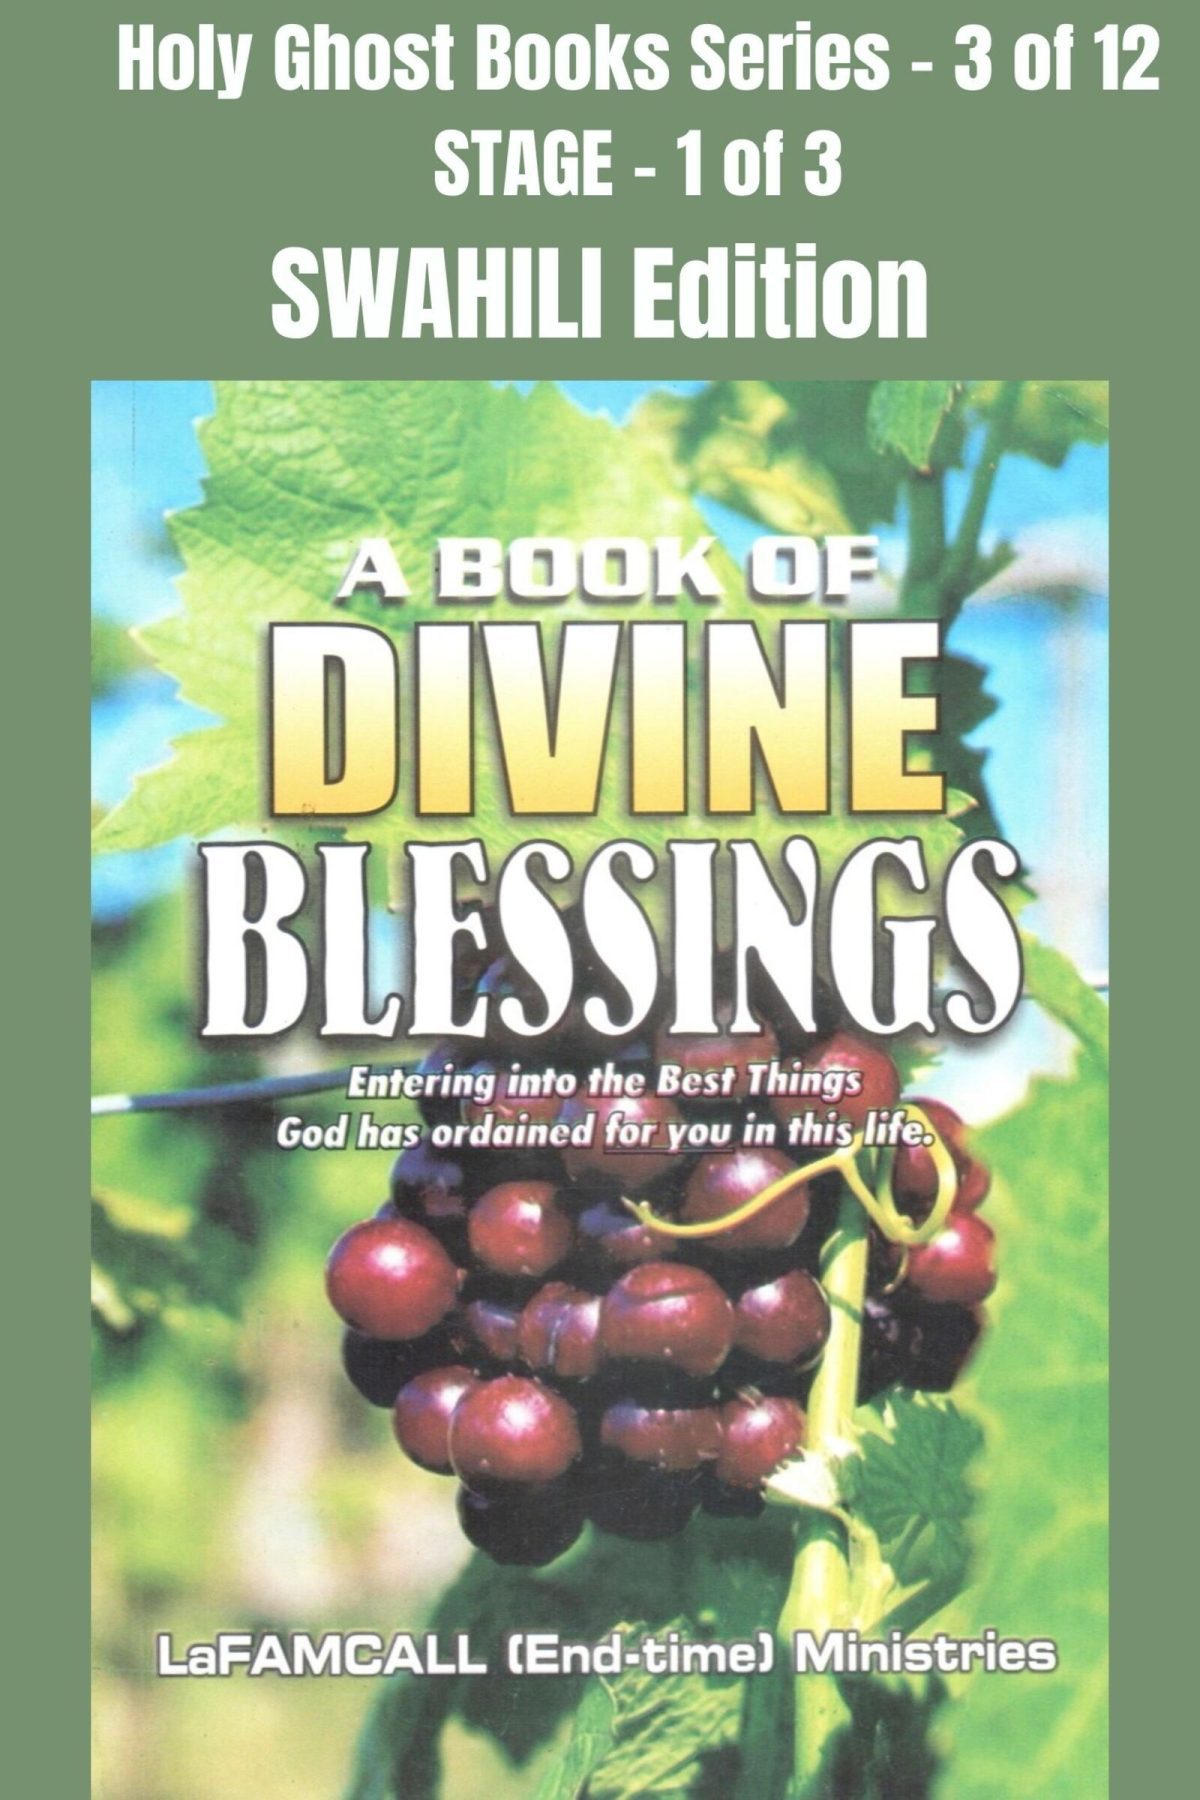 A Book on Divine Blessing SWAHILI - A BOOK OF DIVINE BLESSINGS - Entering into the Best Things God has ordained for you in this life - SWAHILI EDITION - Ebook School of the Holy Spirit Series 3 of 12, Stage 1 of 3